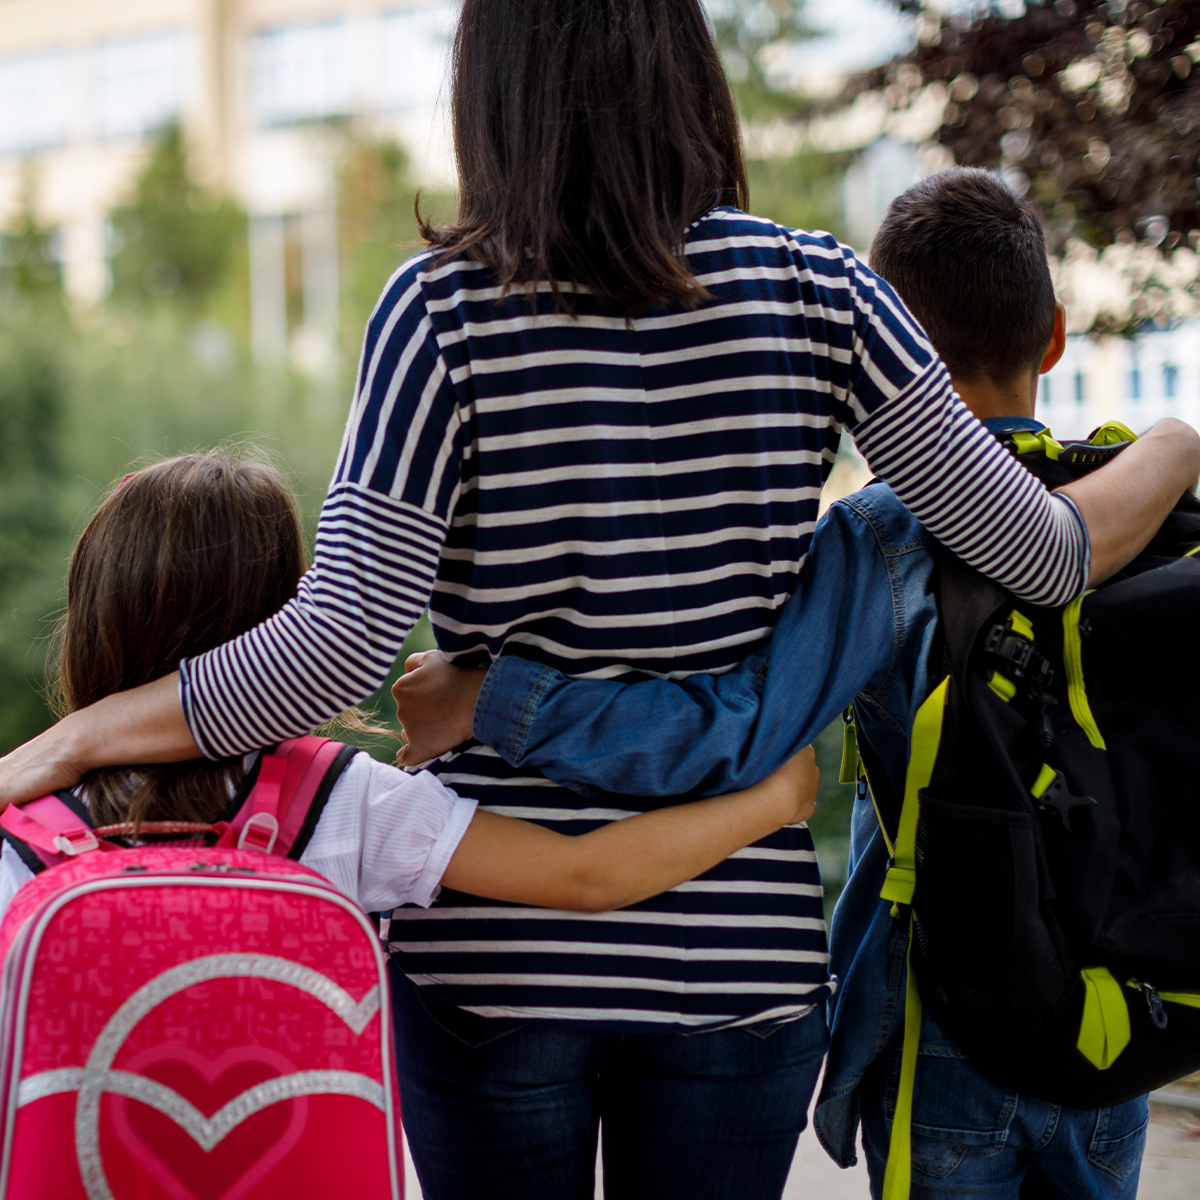 Top 5 Tips to Make Back-to-School a Breeze